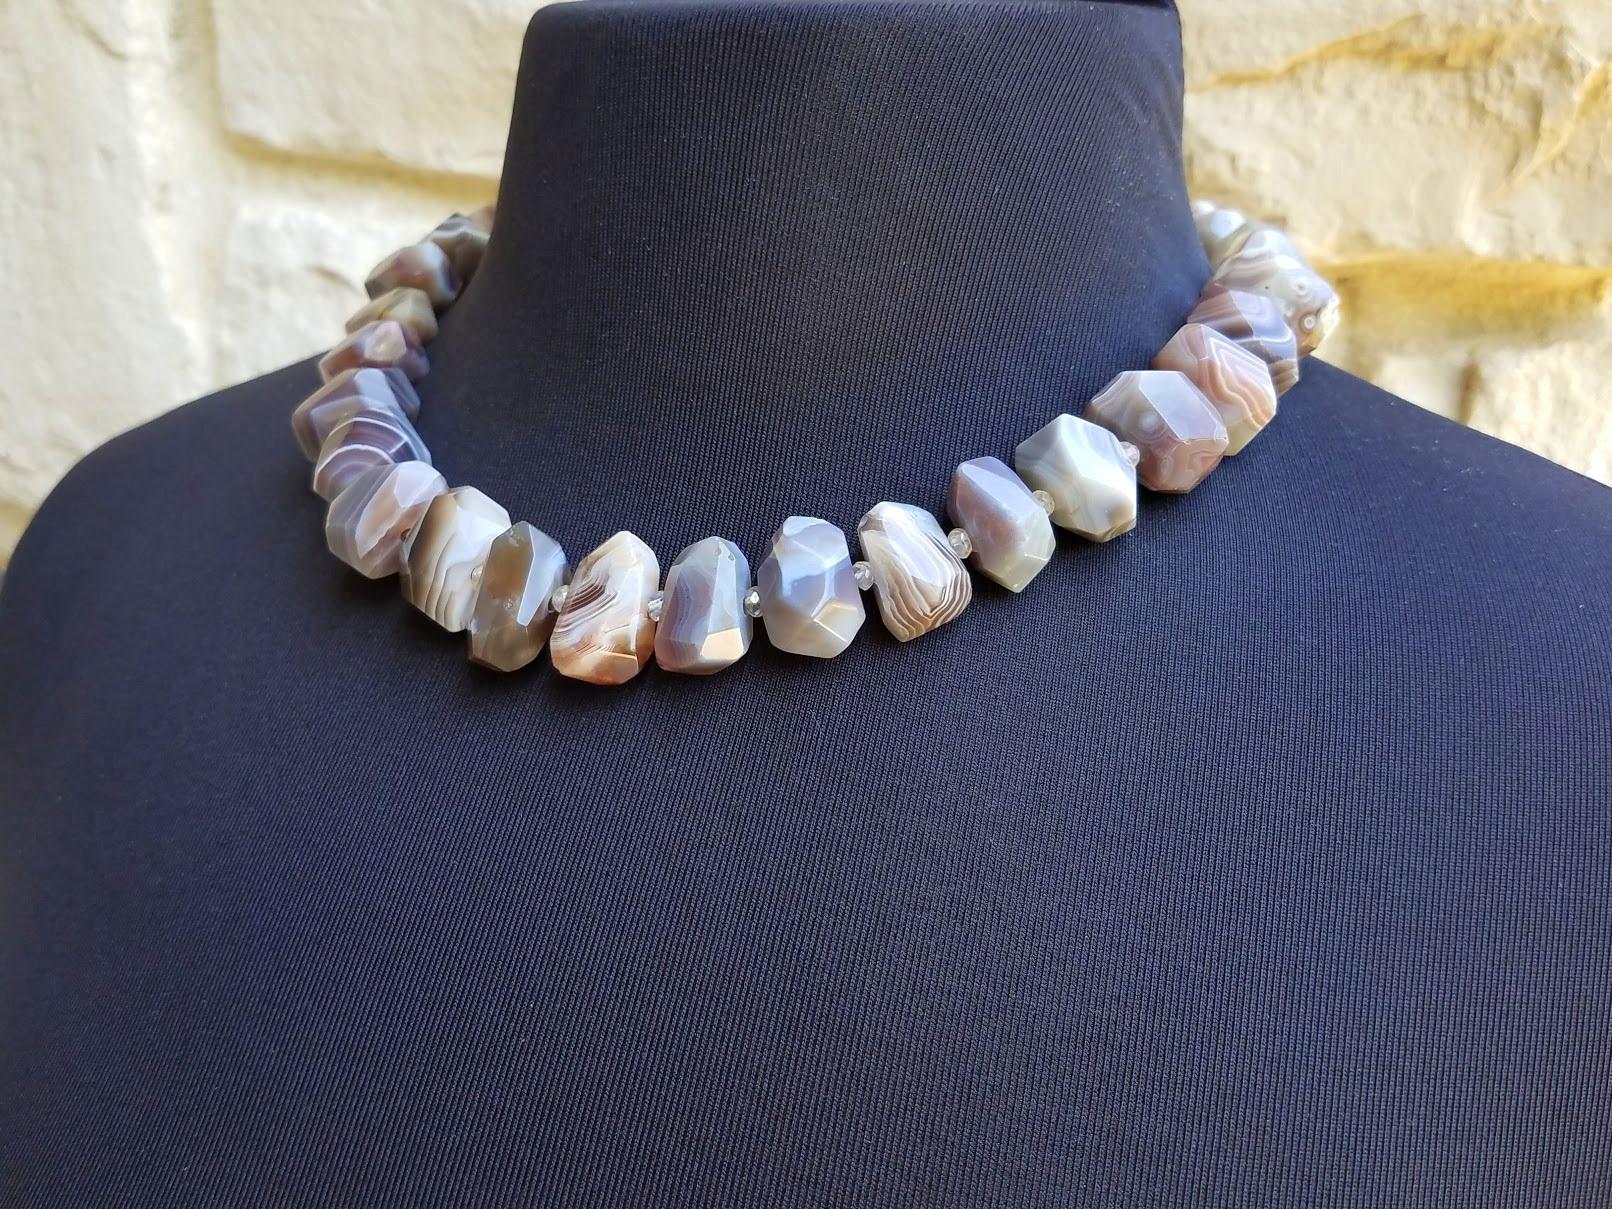 Women's or Men's Botswana Agate Necklace with Rock Crystal and Fire Agate